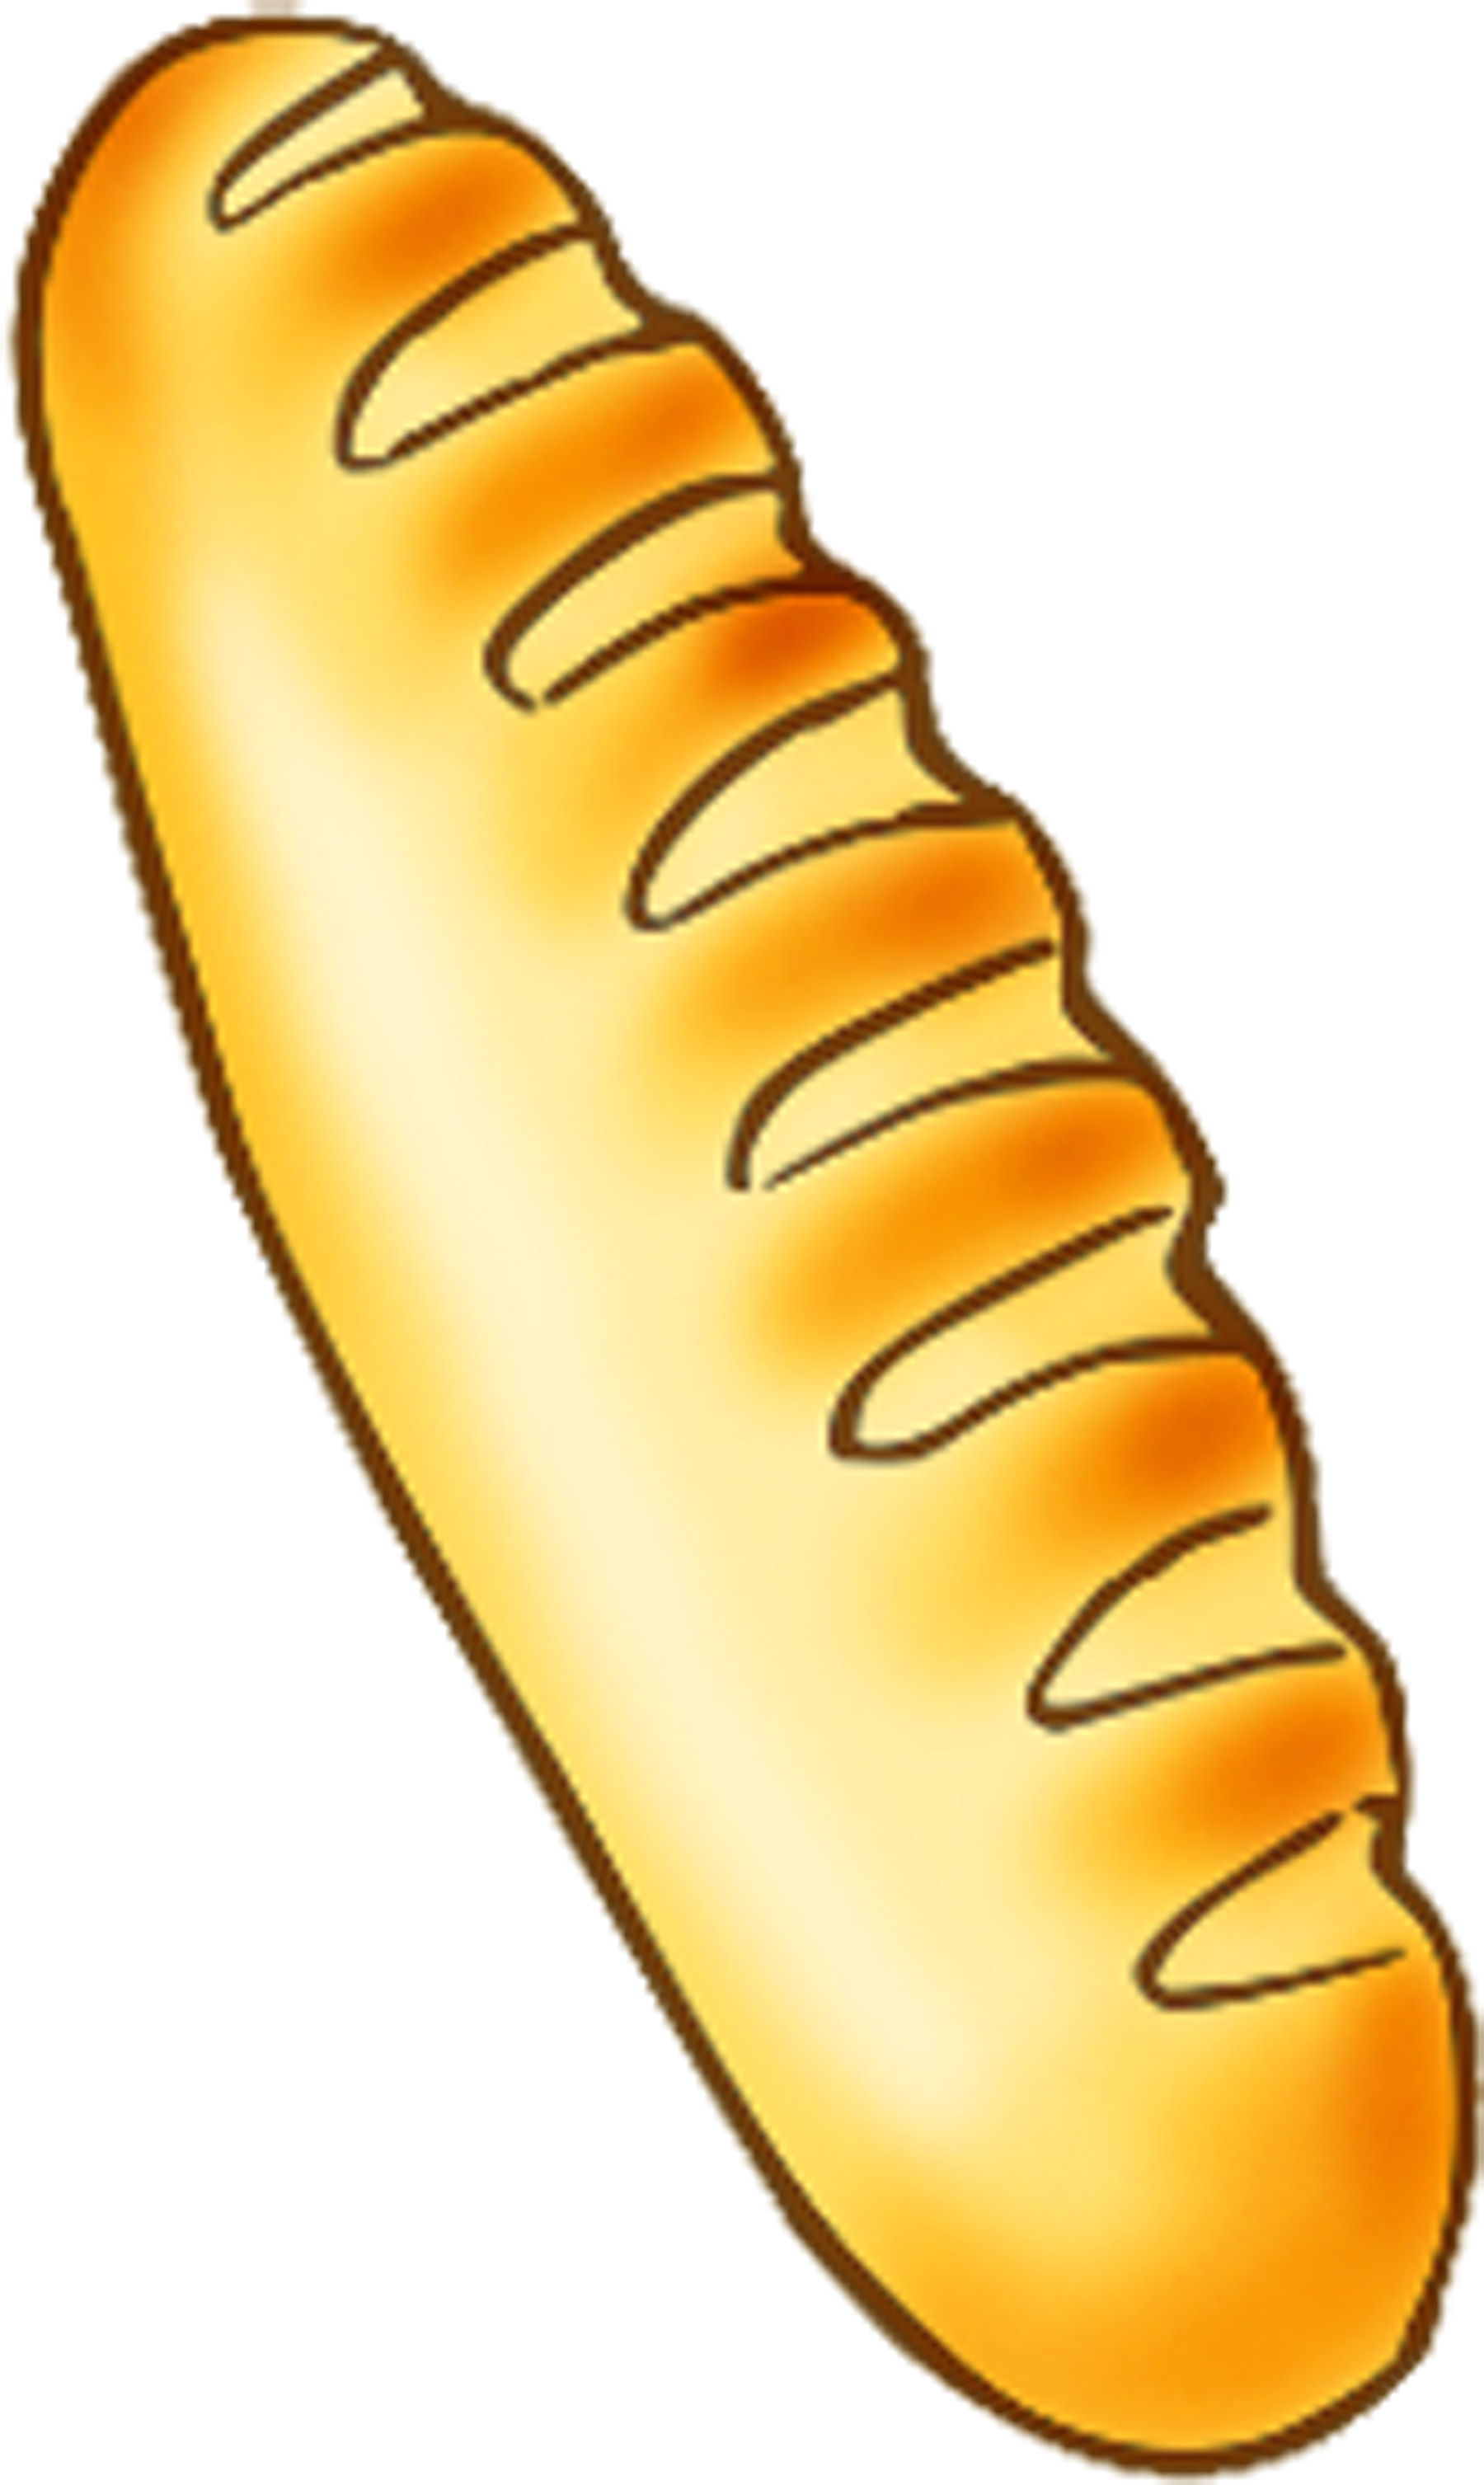 Bread clip art free vector for download about